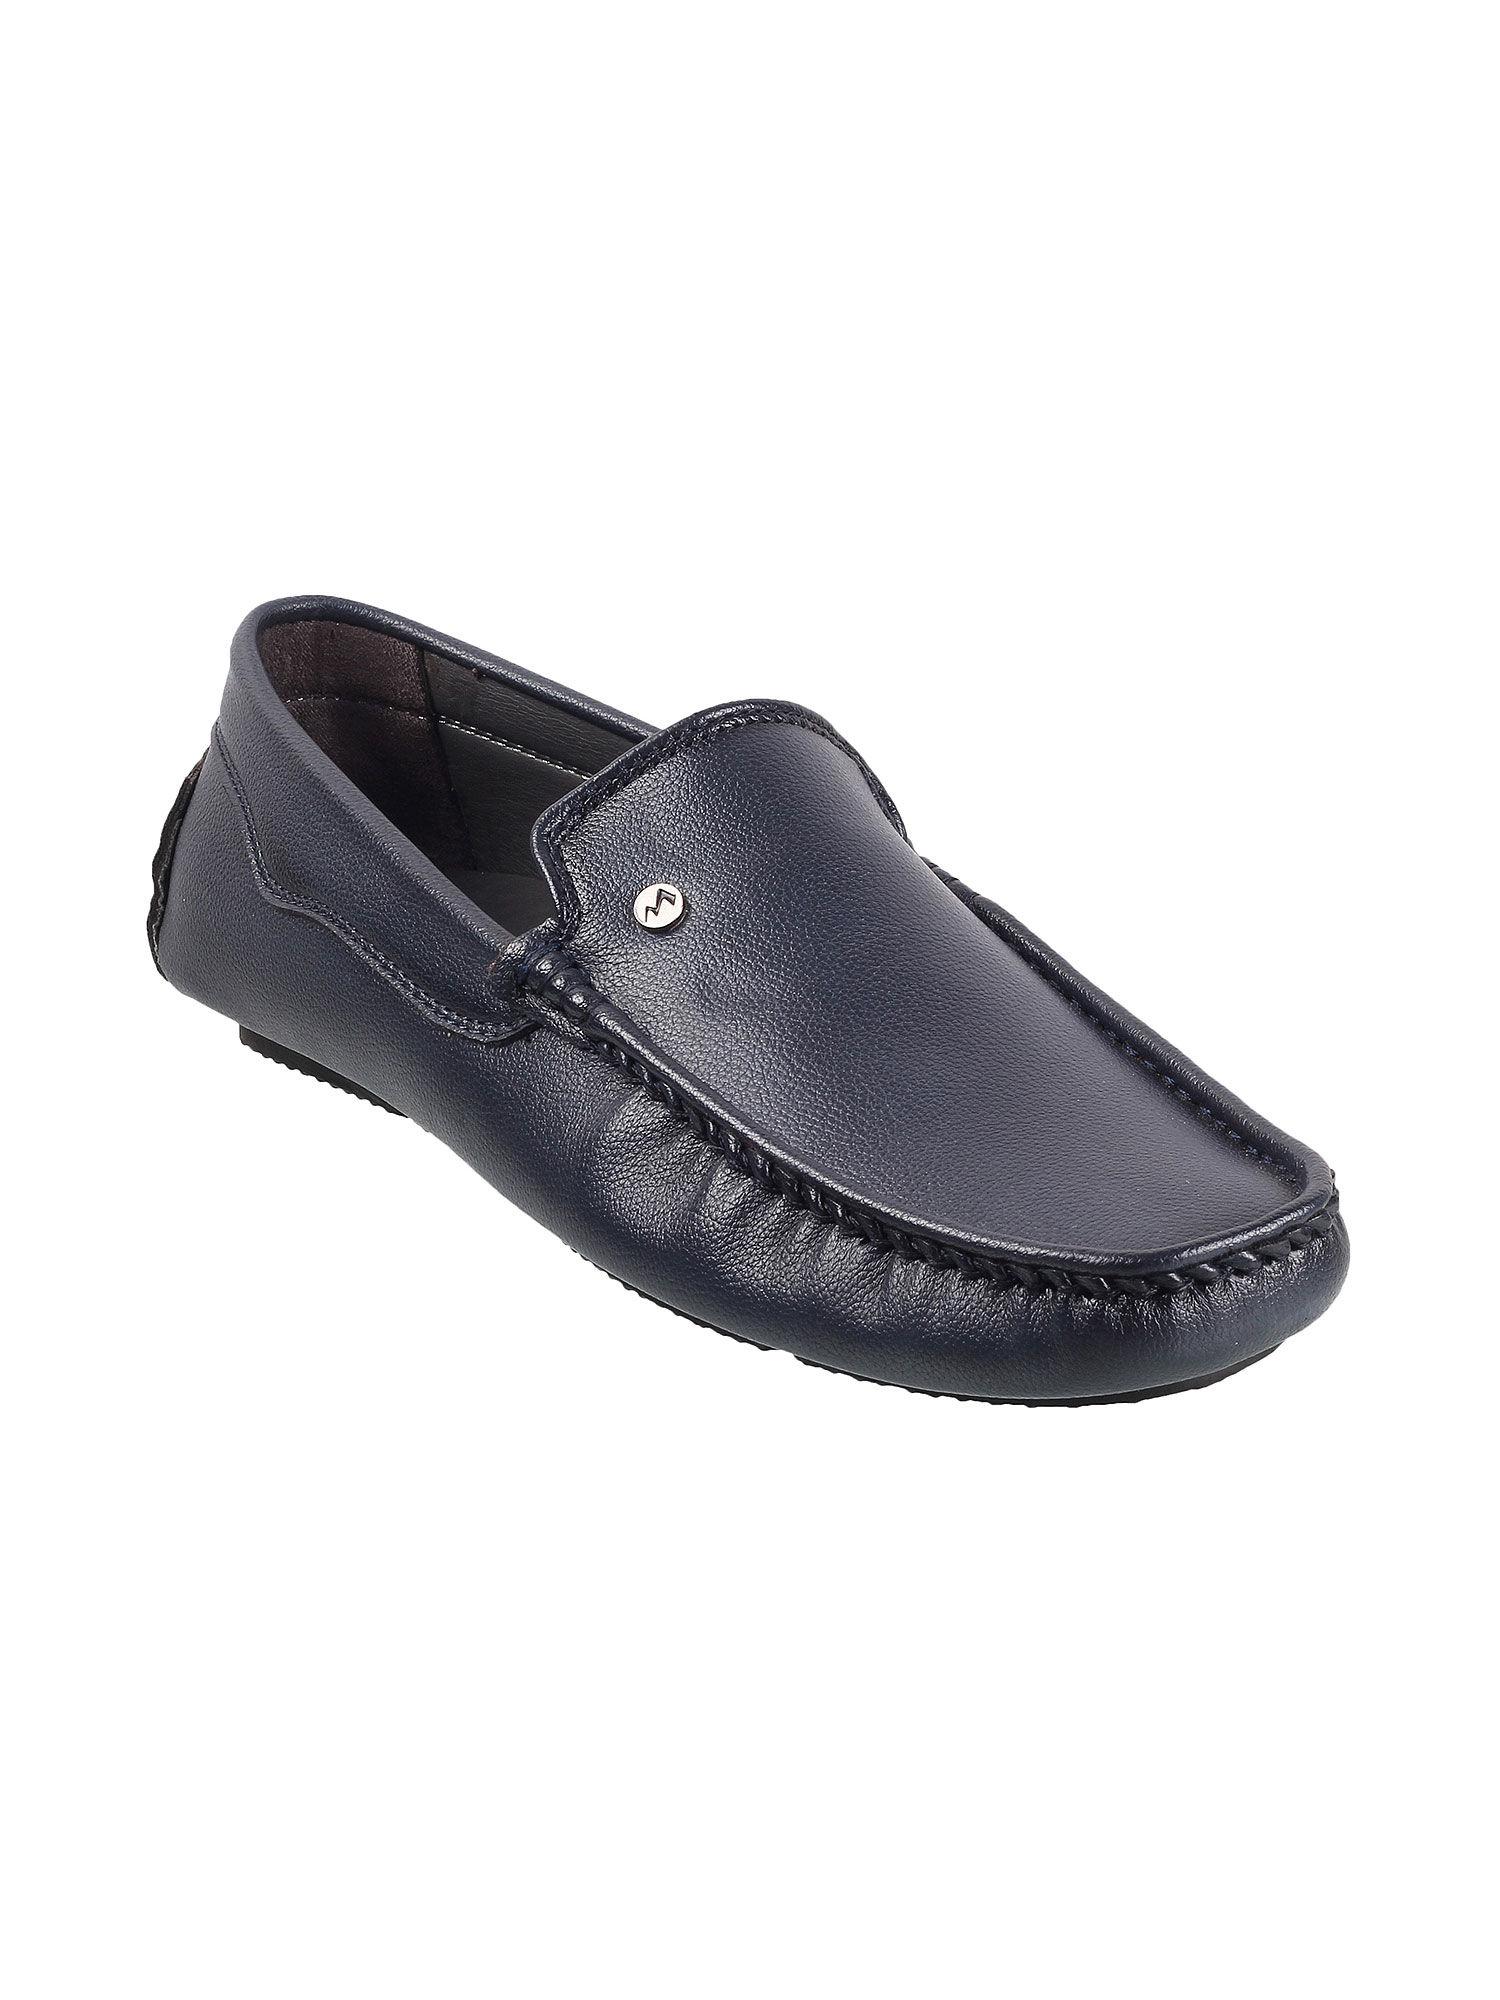 metro mens blue driving shoes mochi navy blue solid slip-on